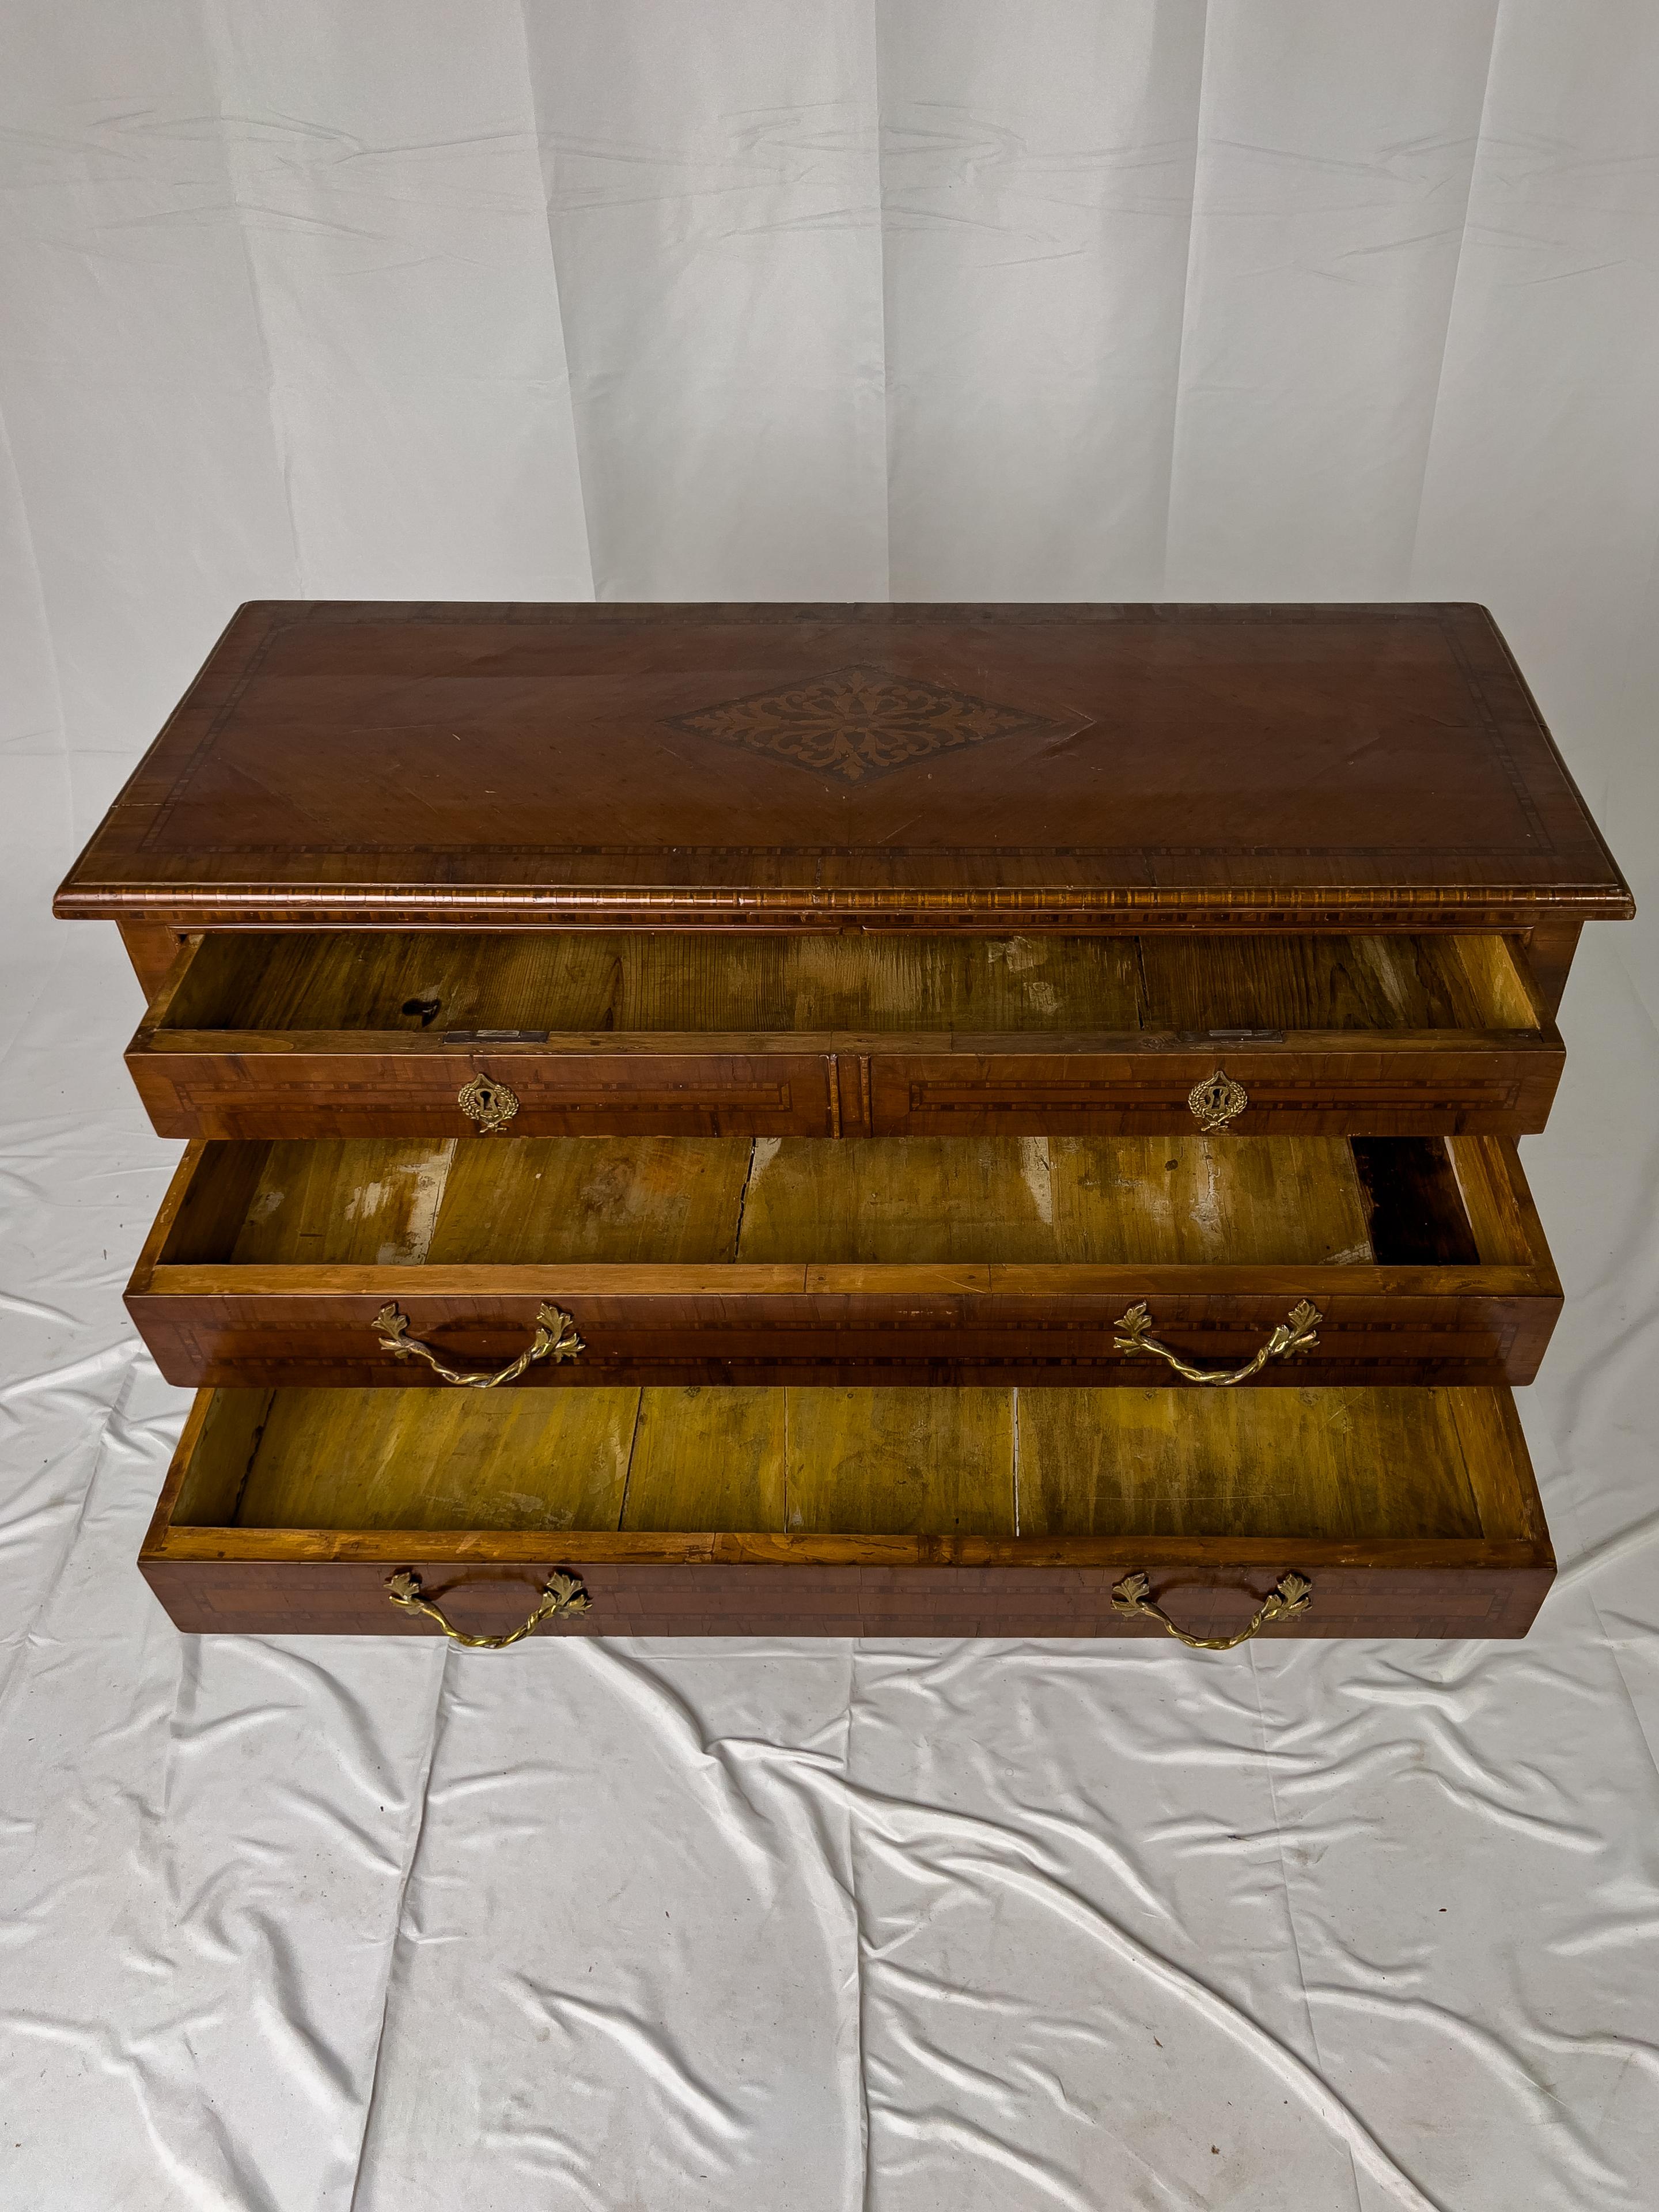 18th Century Italian Commode with marquetry inlay, straight tapered legs, and three drawers (top drawer appears to be two but is really one). The drawers have very unique twisted branch drawer handles, and the top drawer has two escutcheons and two